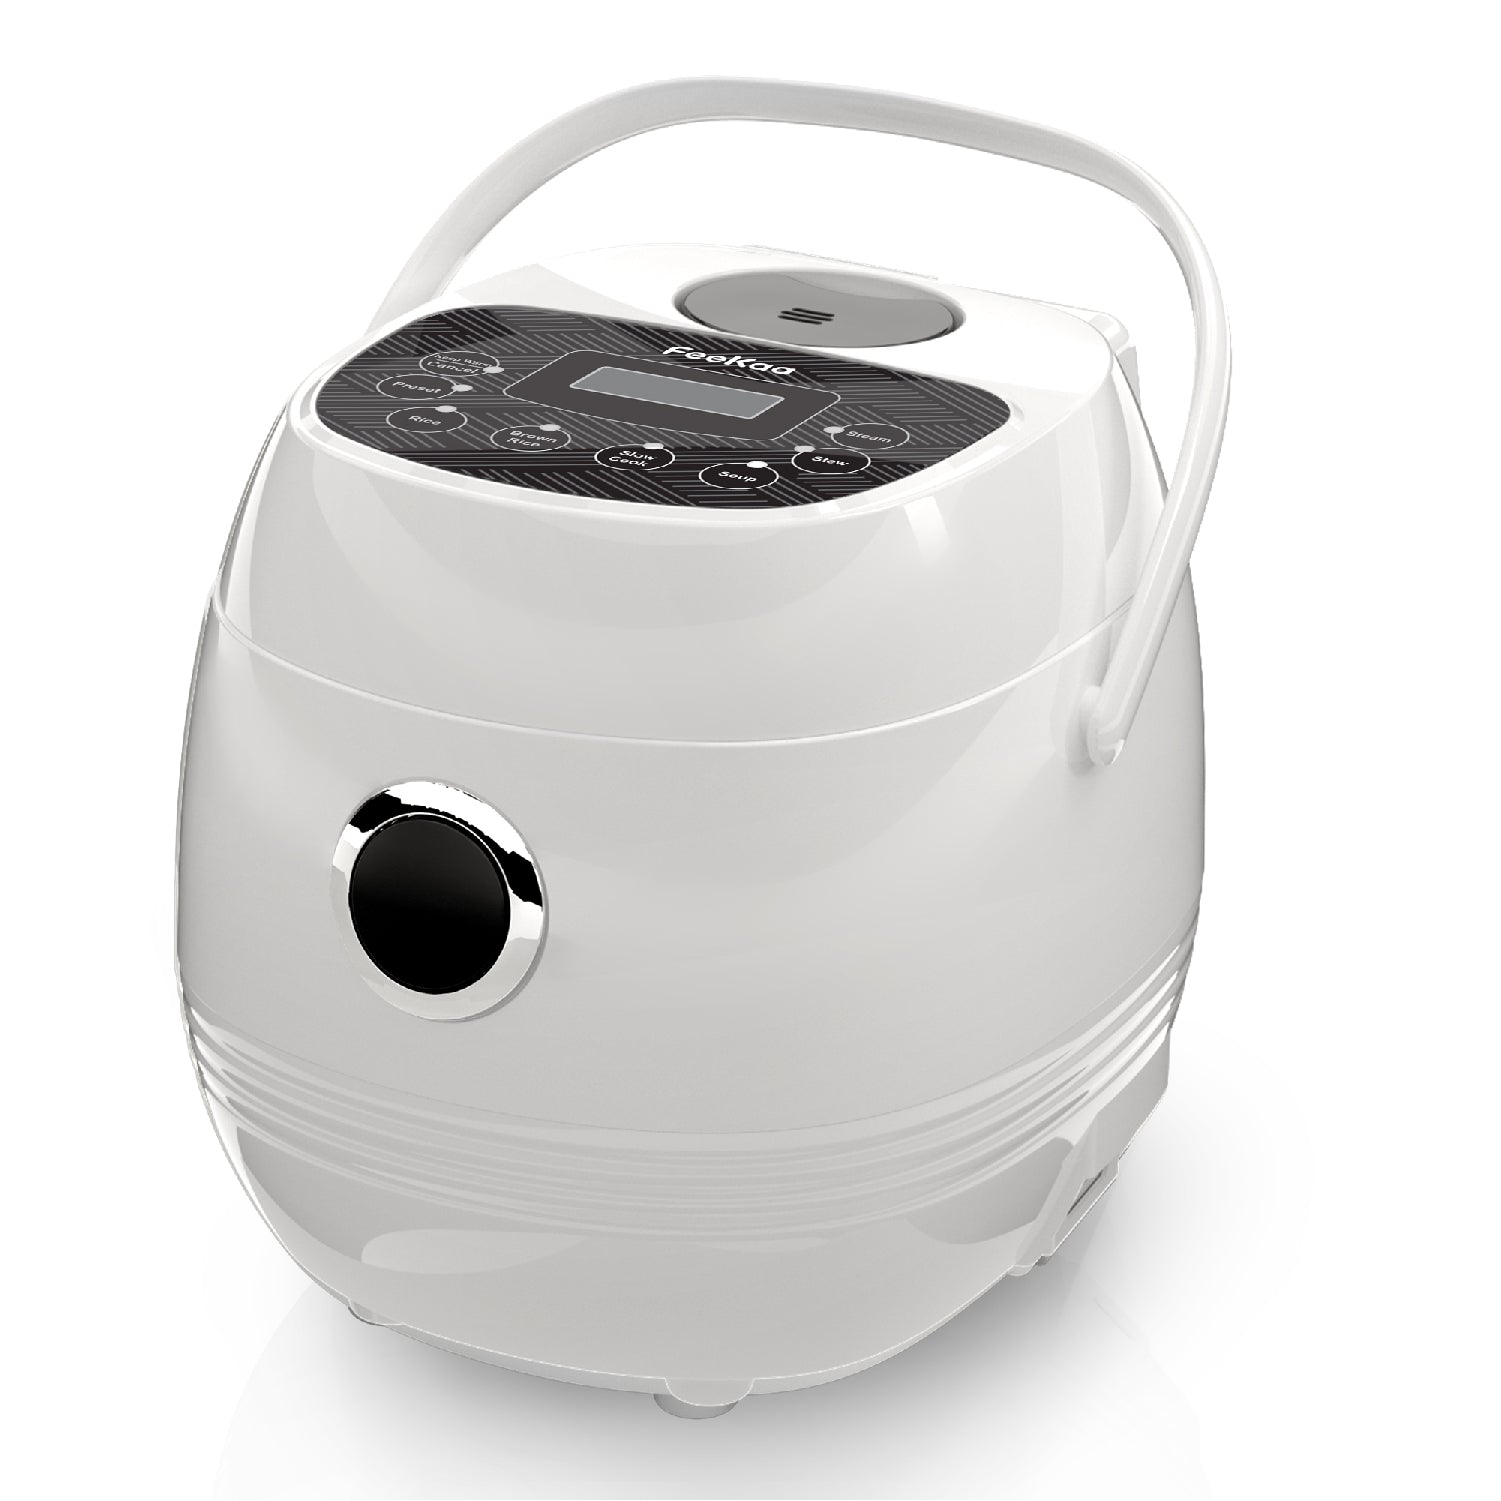 POKAPOKA Mini Rice Cooker 2 Cups Uncooked, Small Rice Cooker with Portable  Handle, 24-H Timer Delay, Non-stick Travel Rice Cooker for White Rice